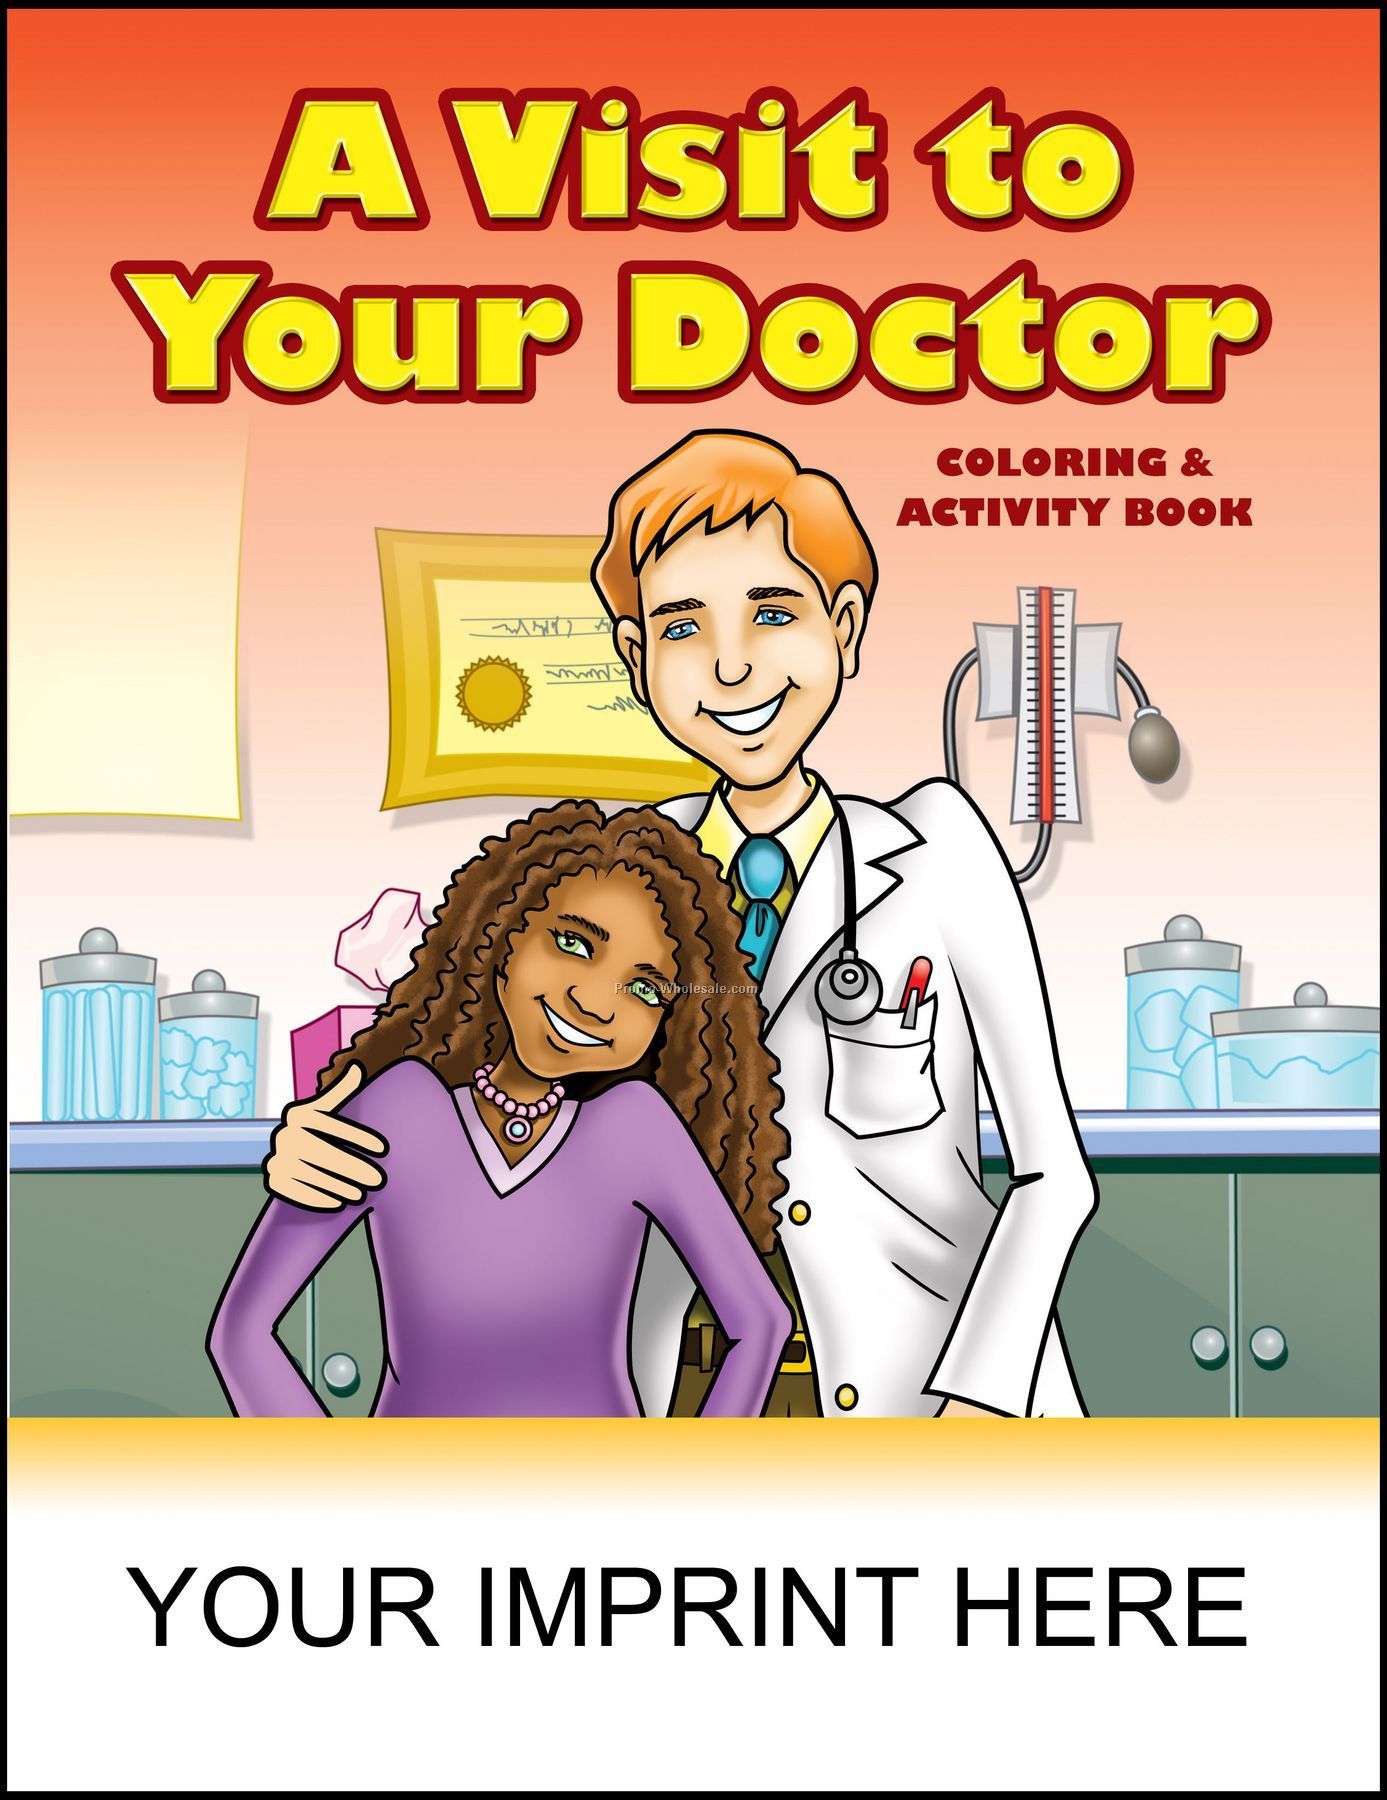 8-3/8"x10-7/8" A Visit To Your Doctor Coloring & Activity Book